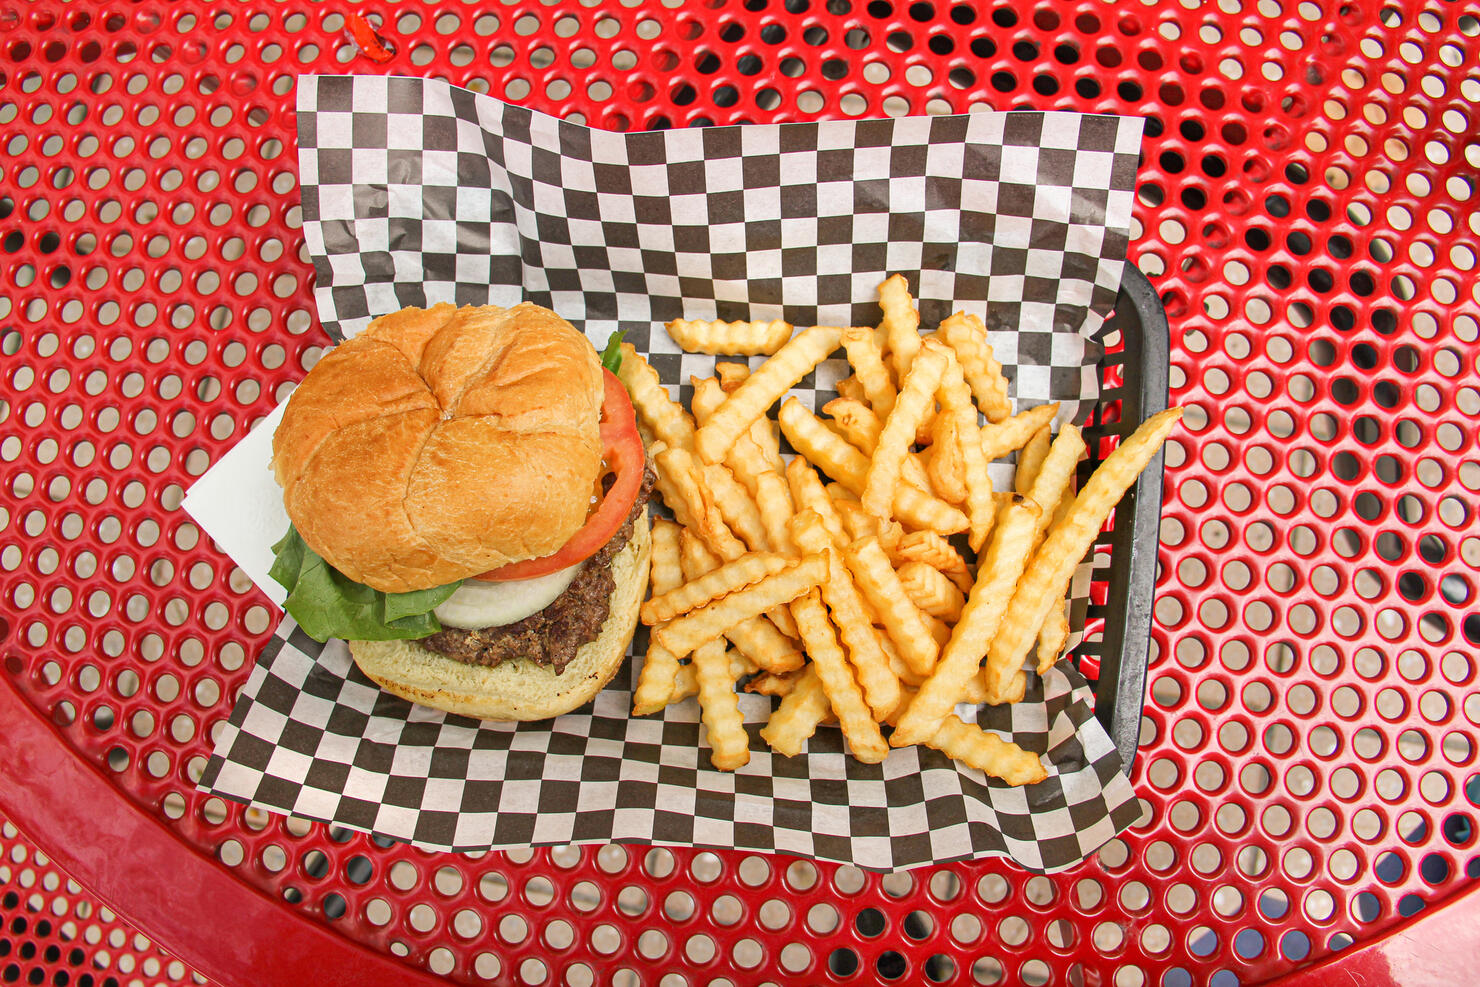 Hamburger and French Fries on Tray Outdoors